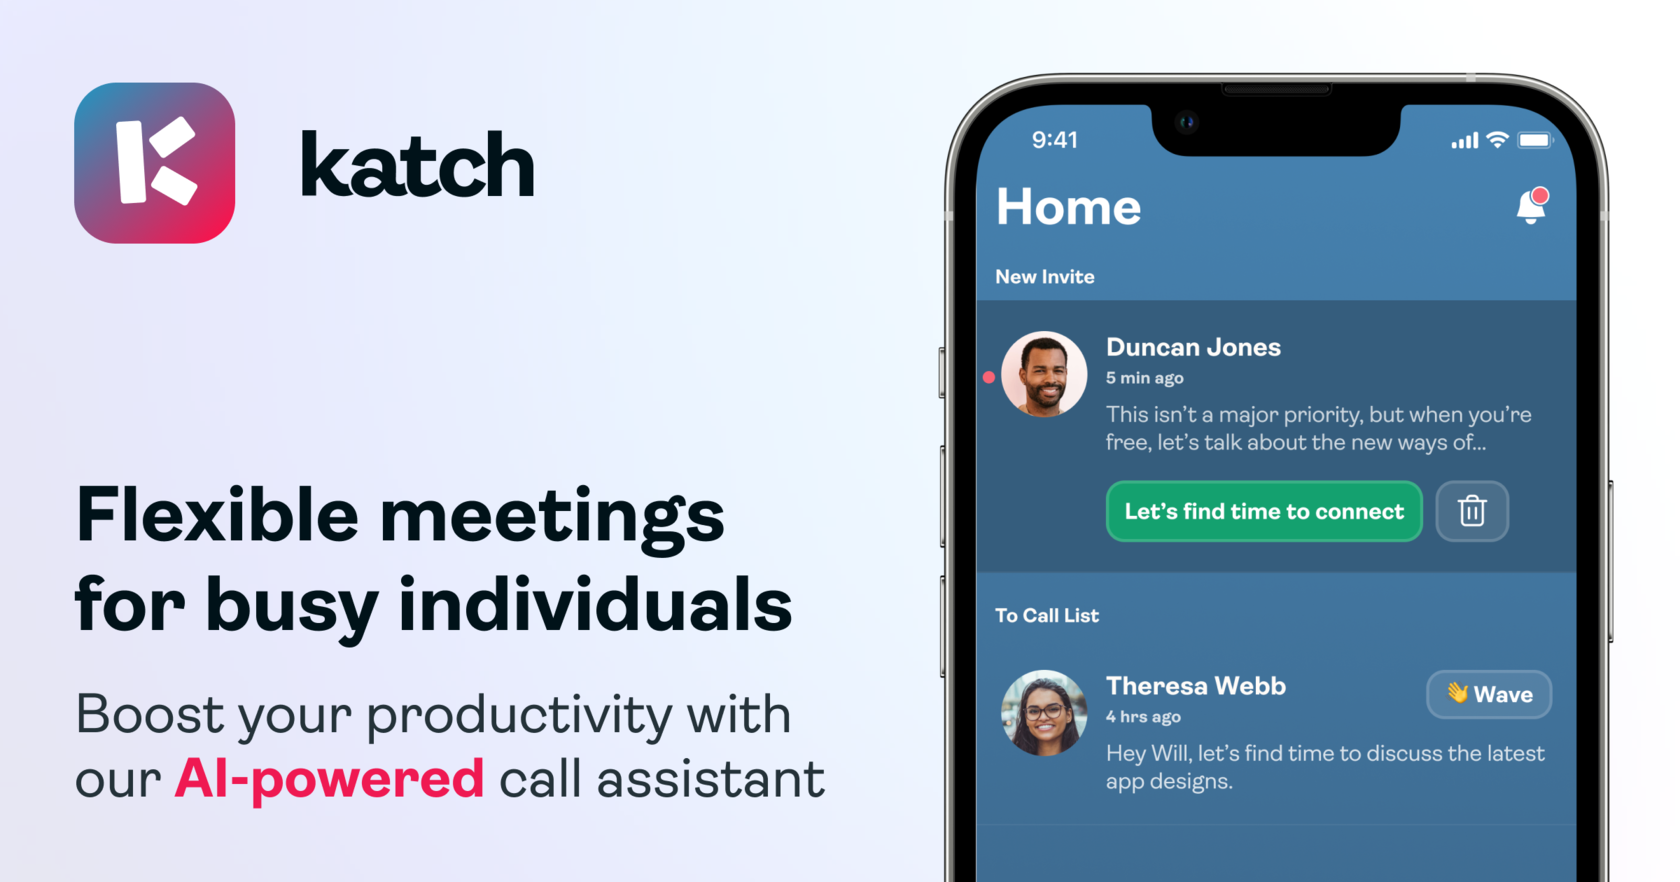 Katch - An app for call assistant to schedule and summarize meetings